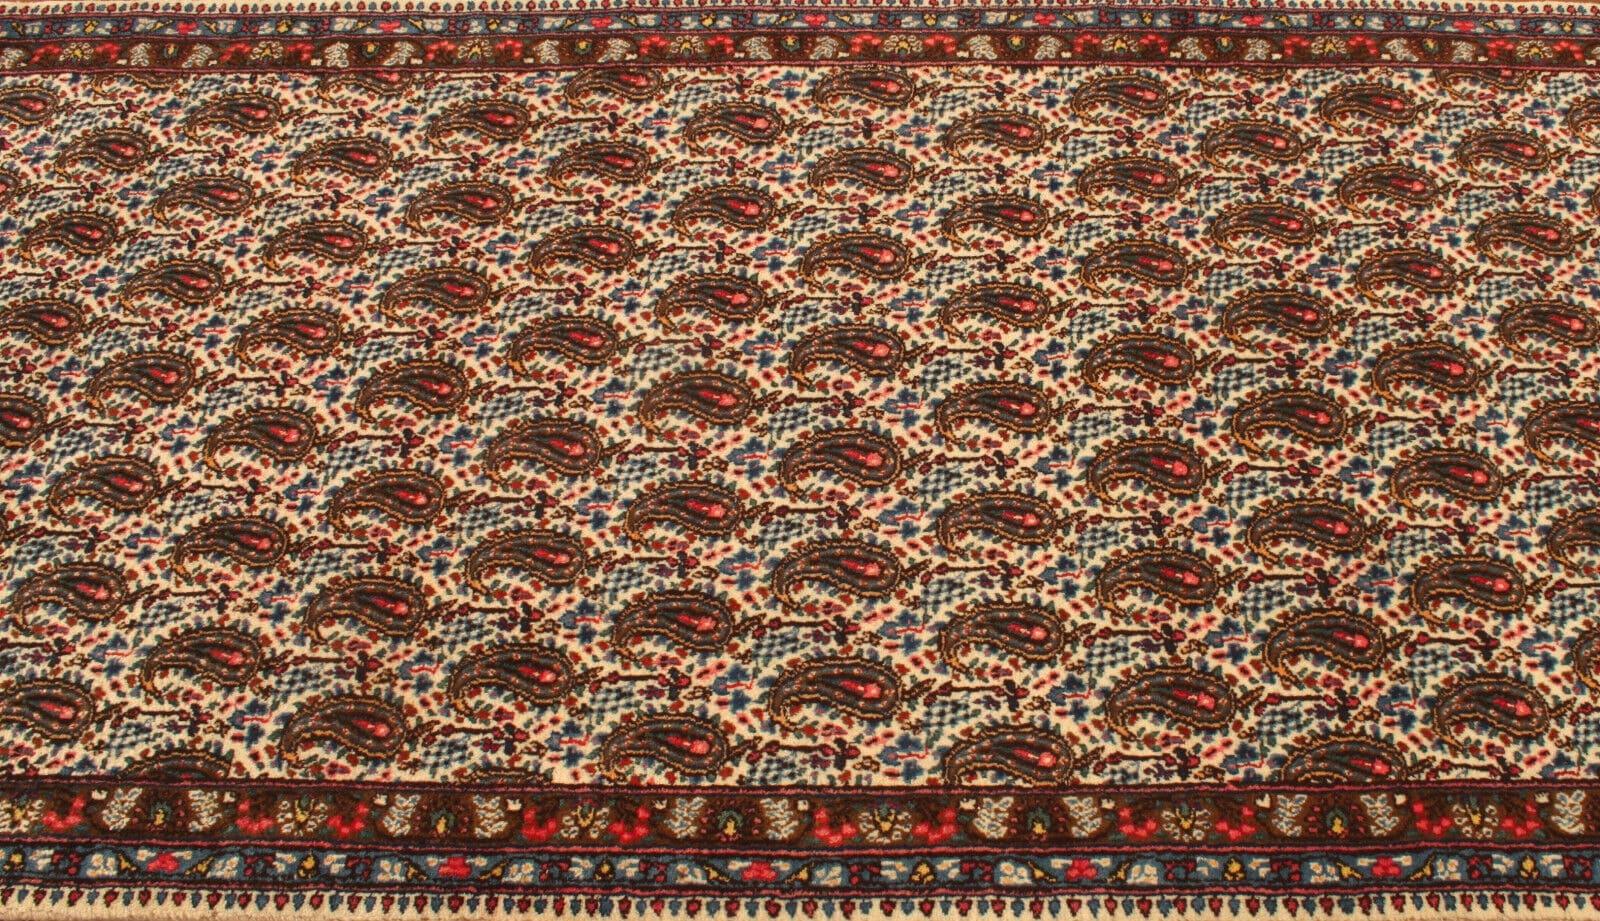 Handmade Vintage Persian Style Senneh Runner Rug 3.4' x 10.1', 1970s - 1T43 In Good Condition For Sale In Bordeaux, FR